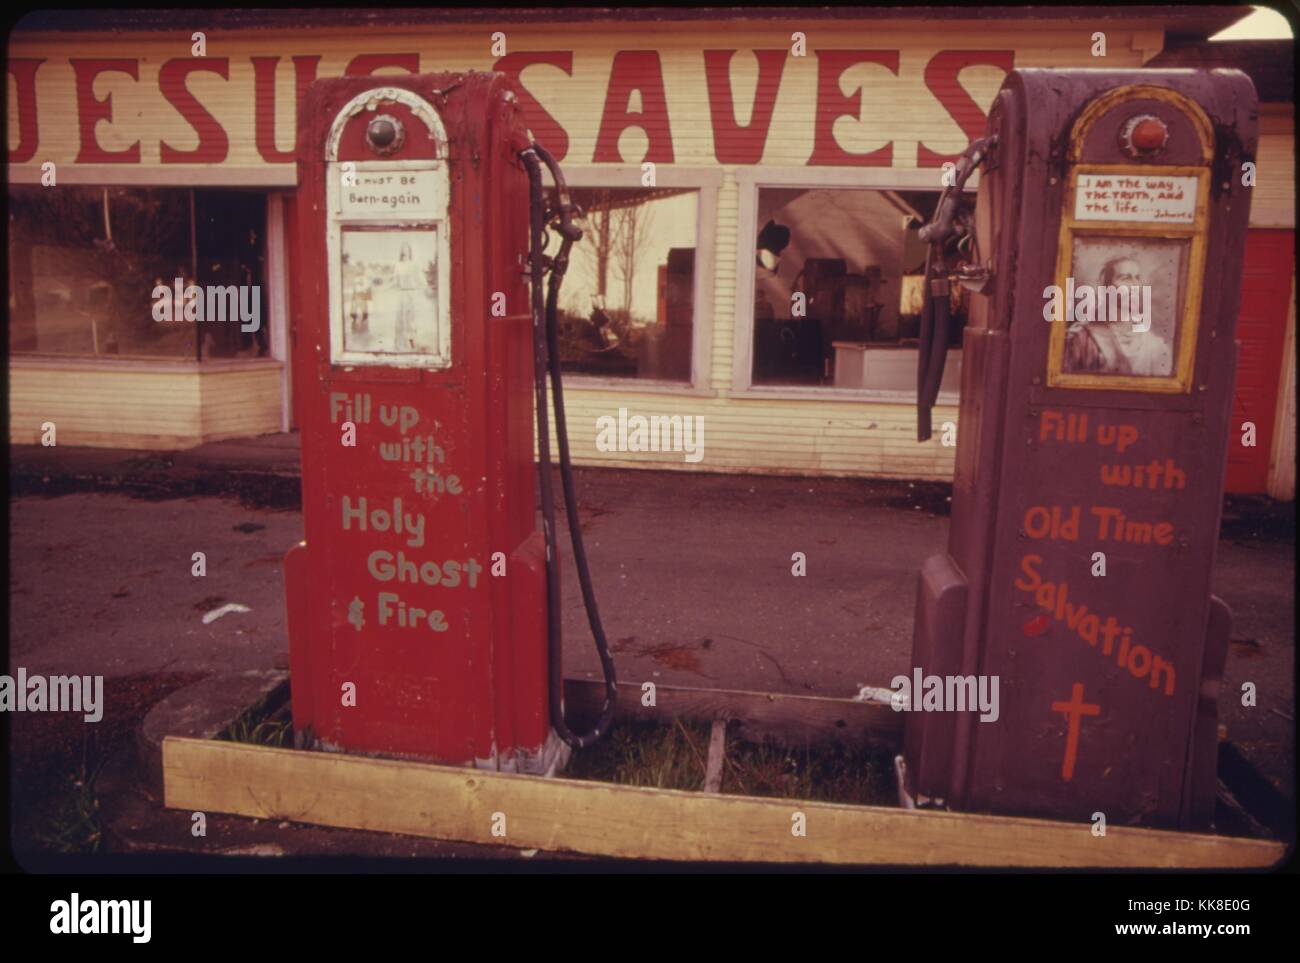 Color photograph of an abandoned gas station being used as a billboard for religious messages, the Station reads 'Jesus Saves', and the pumps read 'Fill up with Old Time Salvation' and 'Fill up with the Holy Ghost Fire', April, 1974. Image courtesy National Archives. Stock Photo